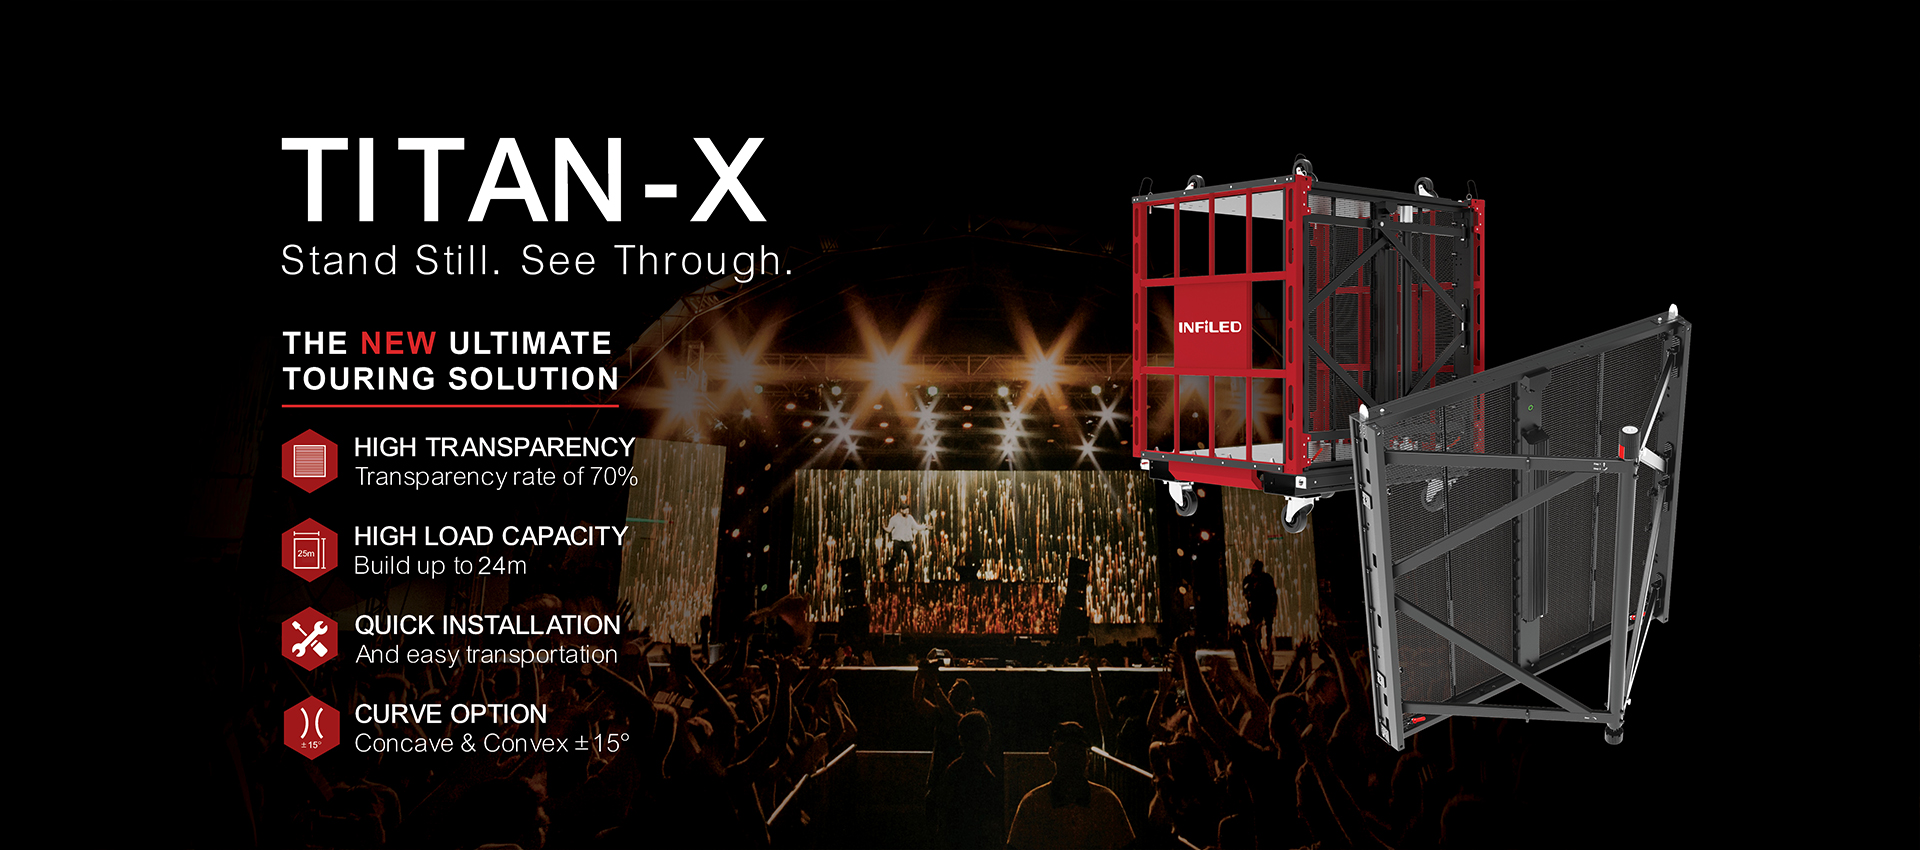 INFiLED transparent screen TITAN-X series of new products launched